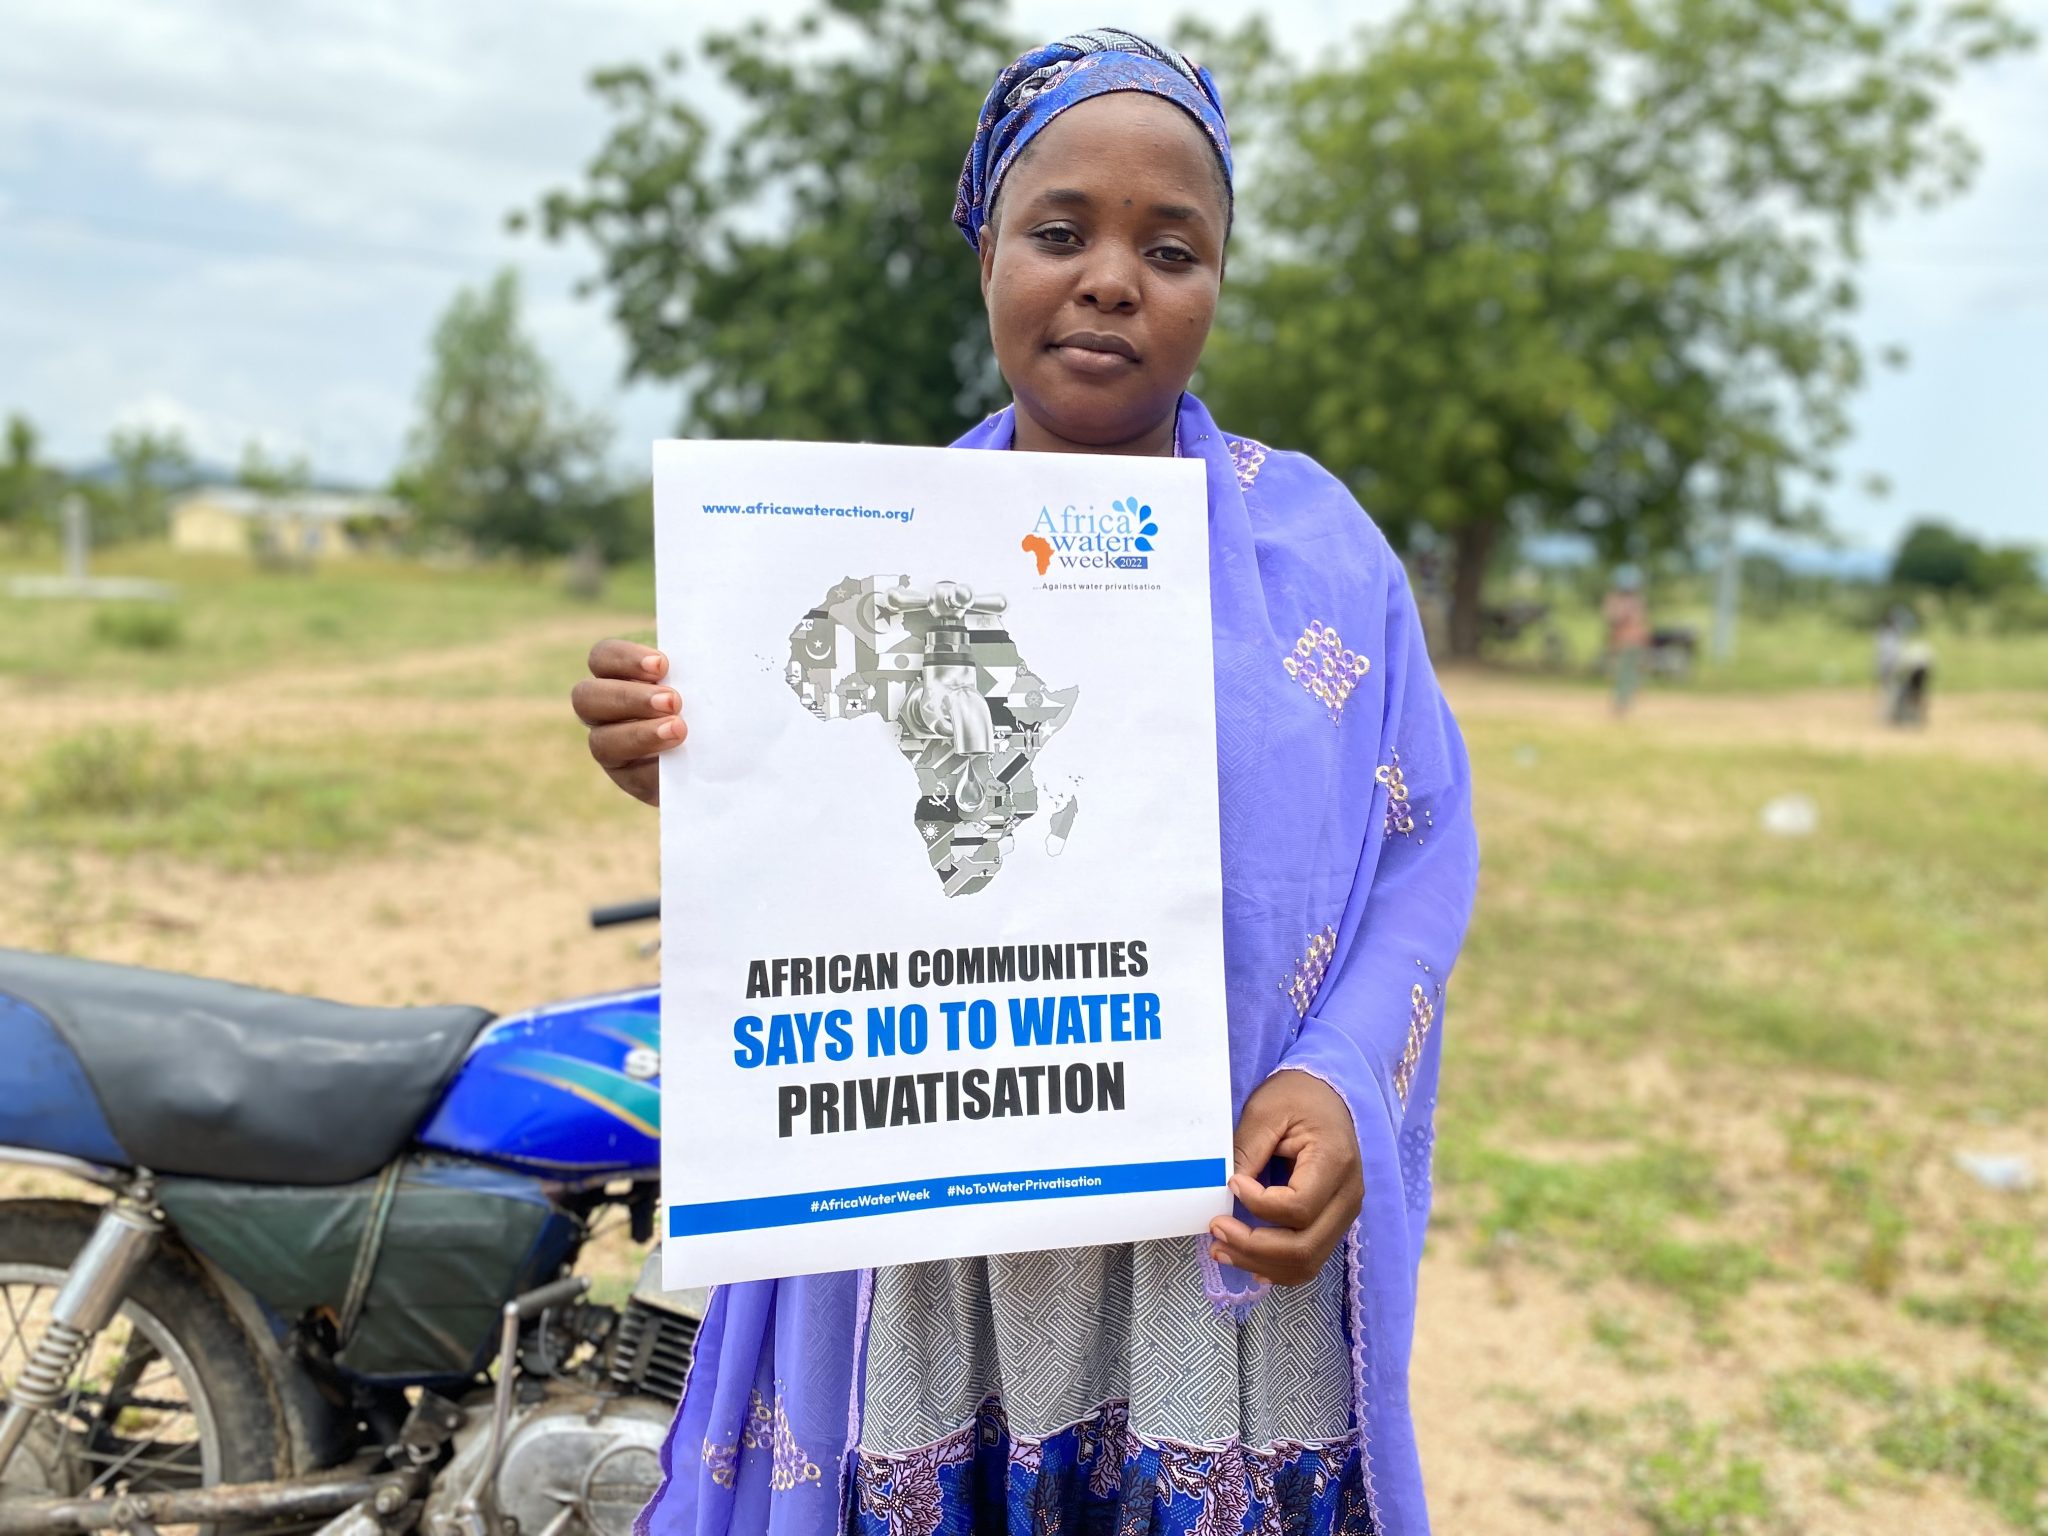 African communities are united against water privatization.